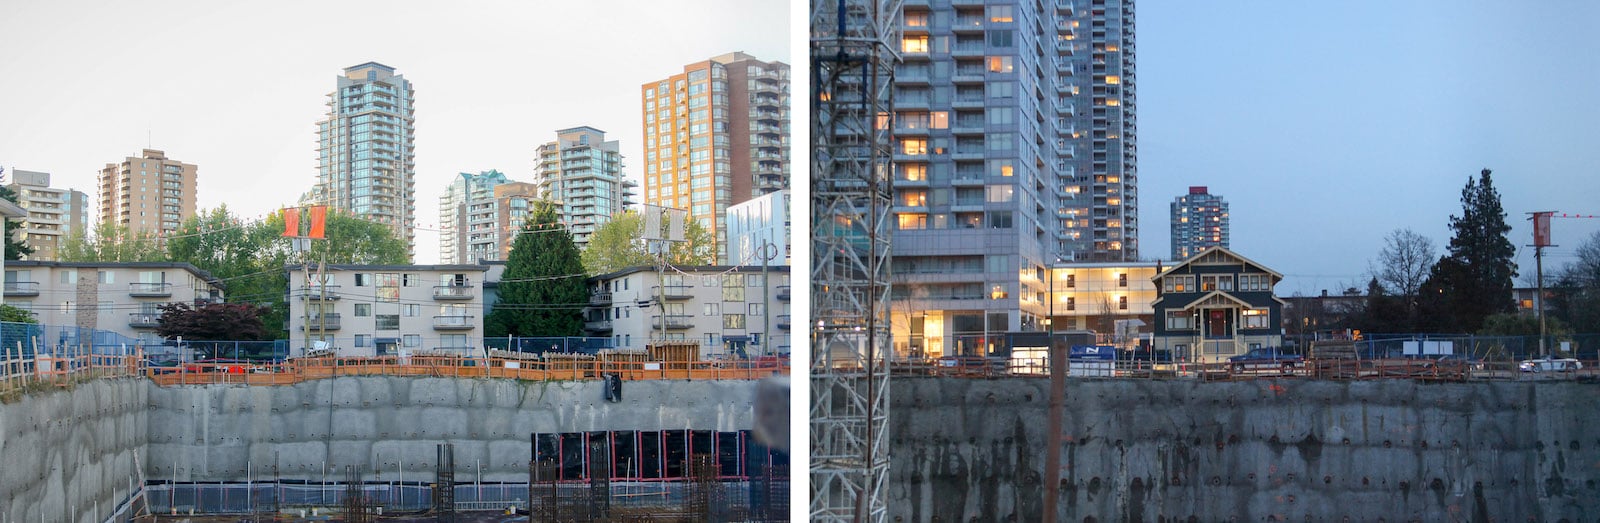 A two-panel image depicts, on the left, low-rise apartments before the sheer concrete walls of a large construction pit in the daytime; on the right, a single-family home sits over the pit at dusk, with highrise condo buildings to its left.